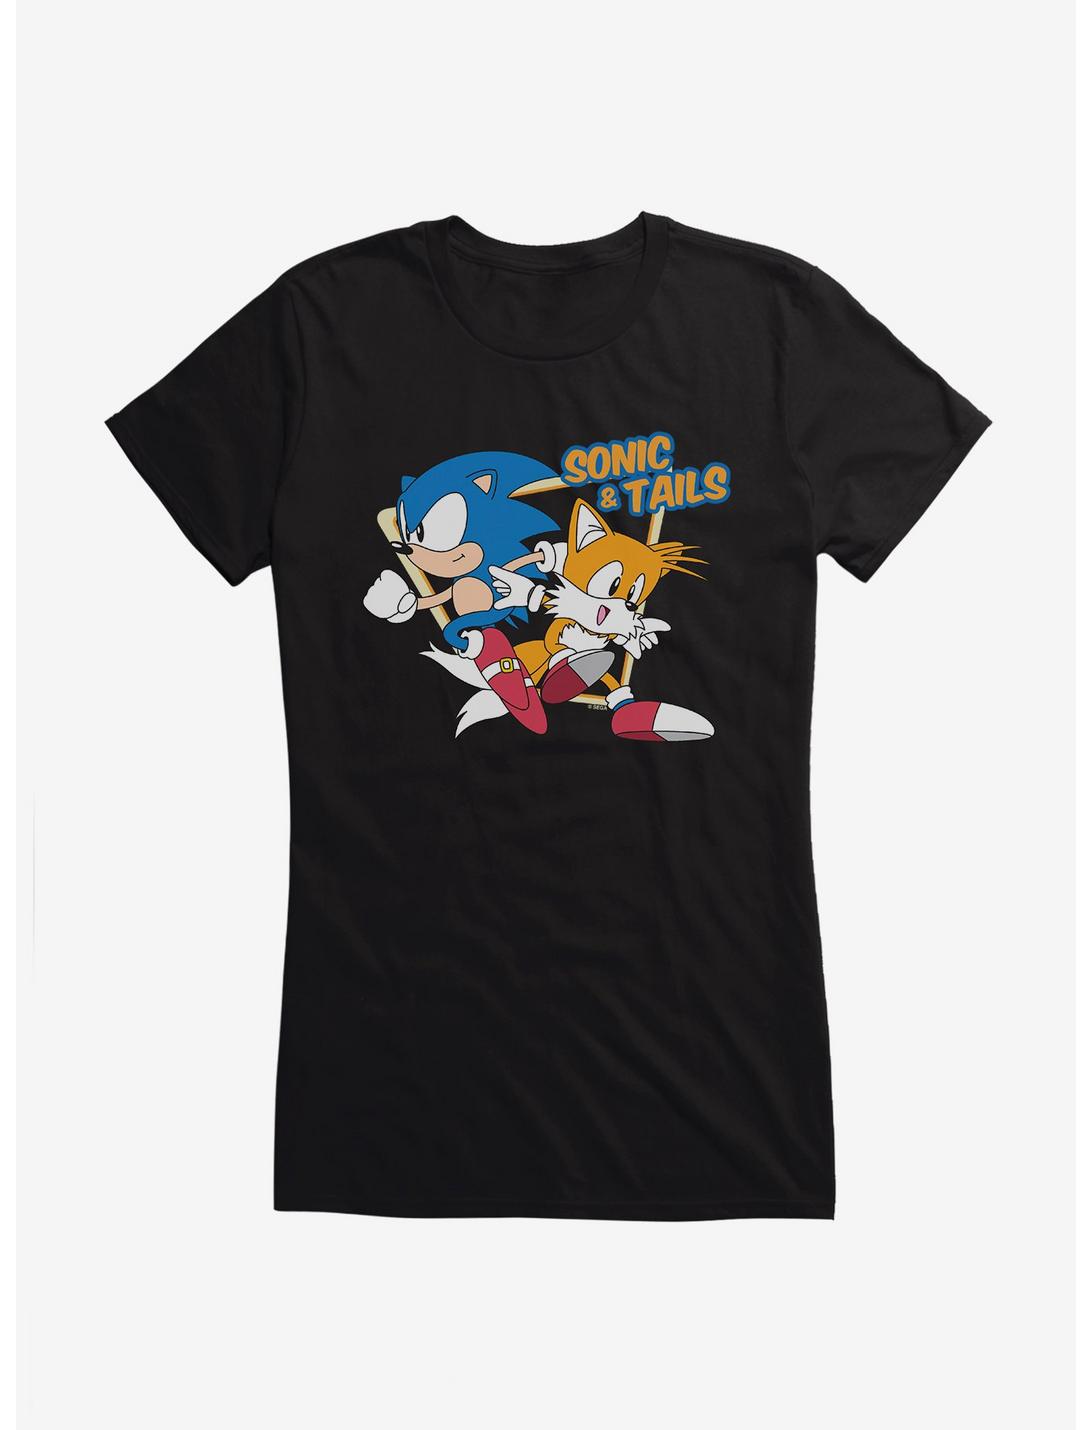 Sonic The Hedgehog Sonic And Tails Girls T-Shirt, BLACK, hi-res